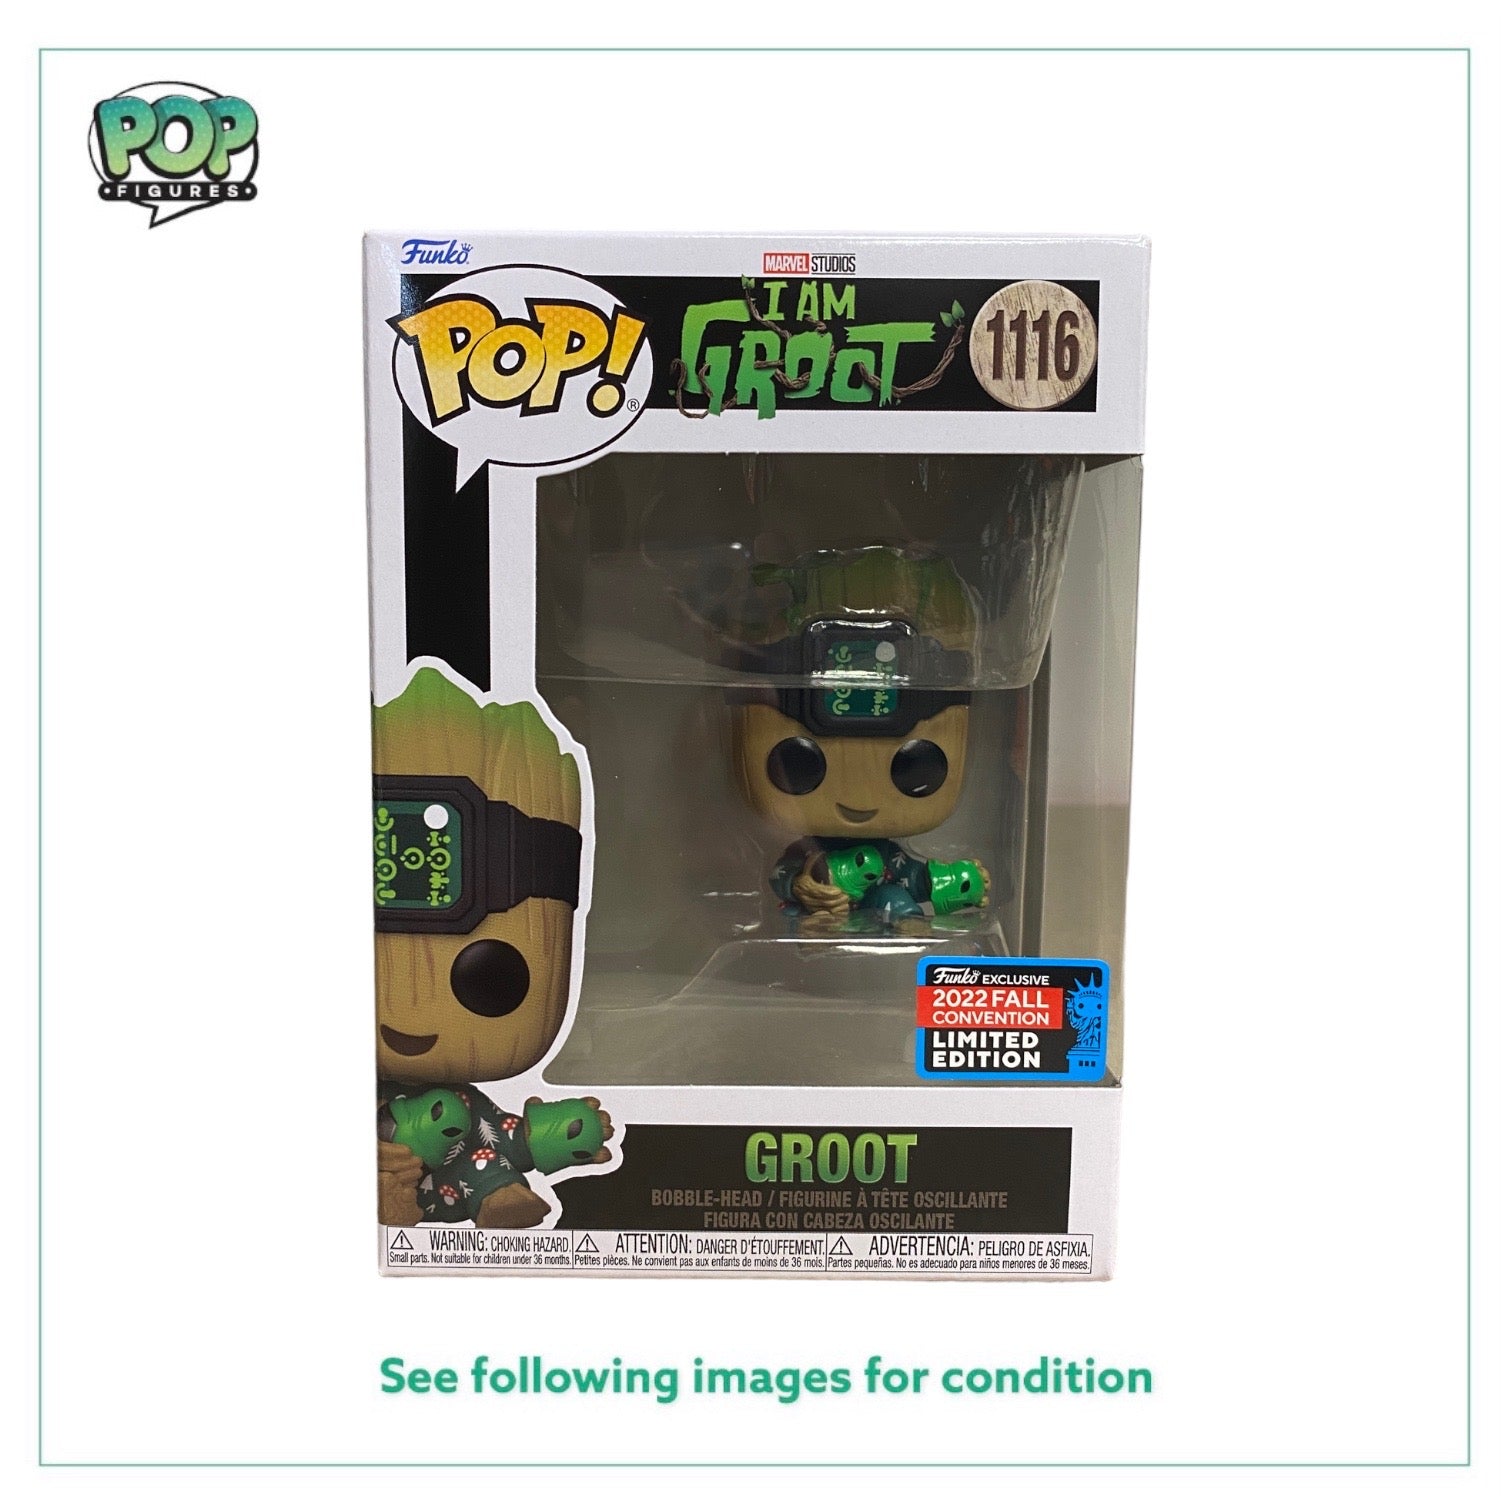 Groot #1116 (w/ Light) Funko Pop! - I Am Groot - NYCC 2022 Shared Exclusive - Condition 9.5/10